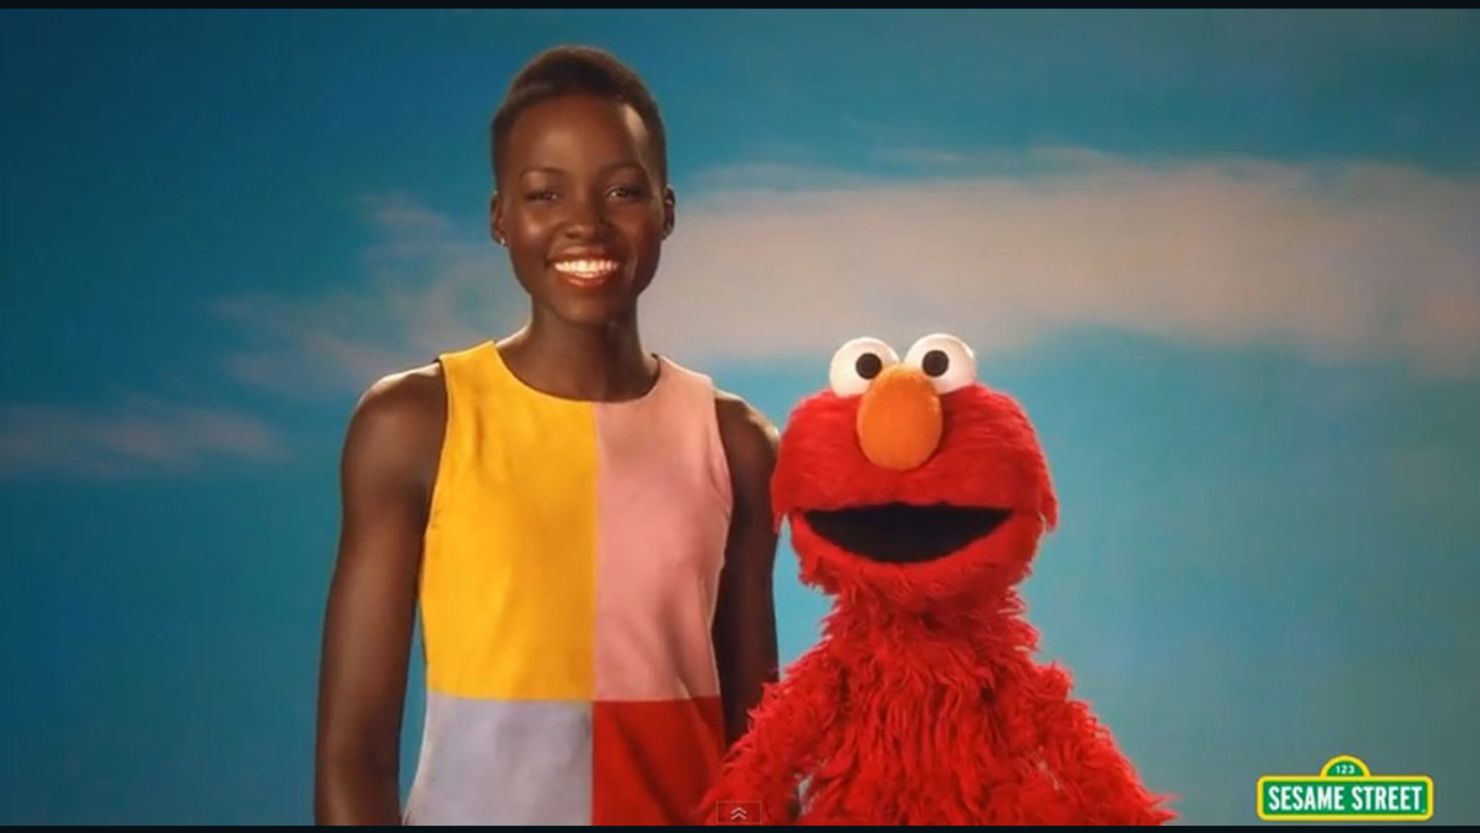 Lupita Nyong'o visited "Sesame Street" Tuesday with an important message of self-acceptance.